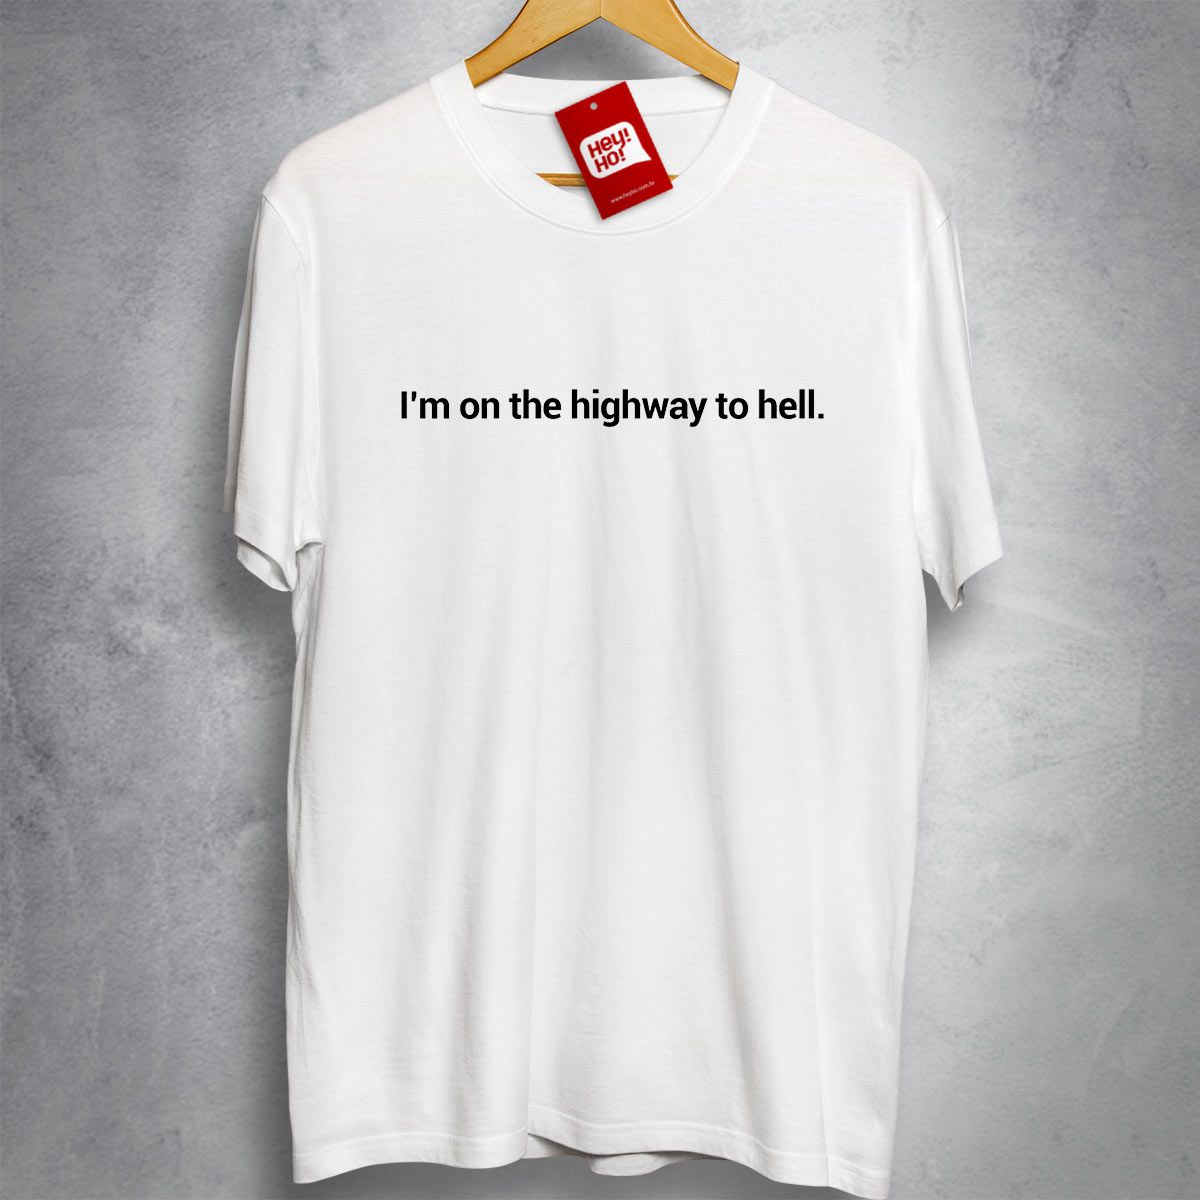 AC/DC - I'm on the highway to hell